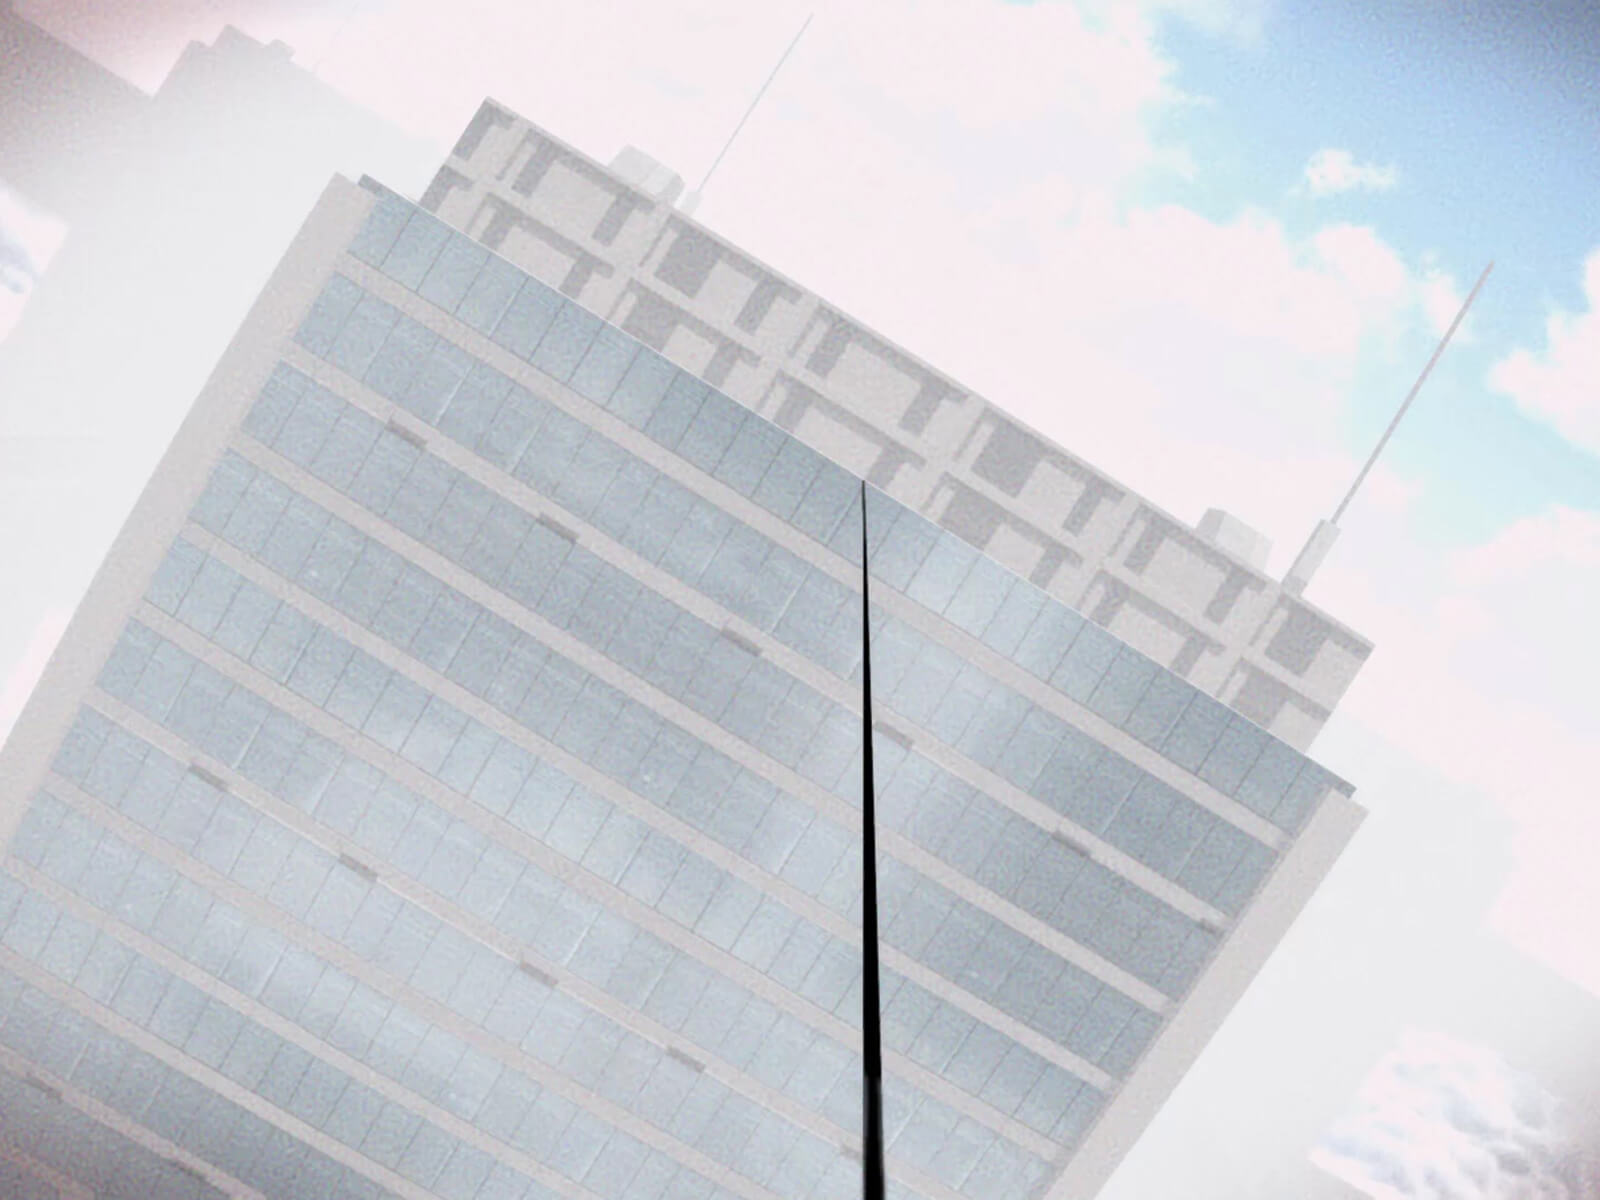 A tilted first-person perspective of someone walking a tightrope to a distant building.